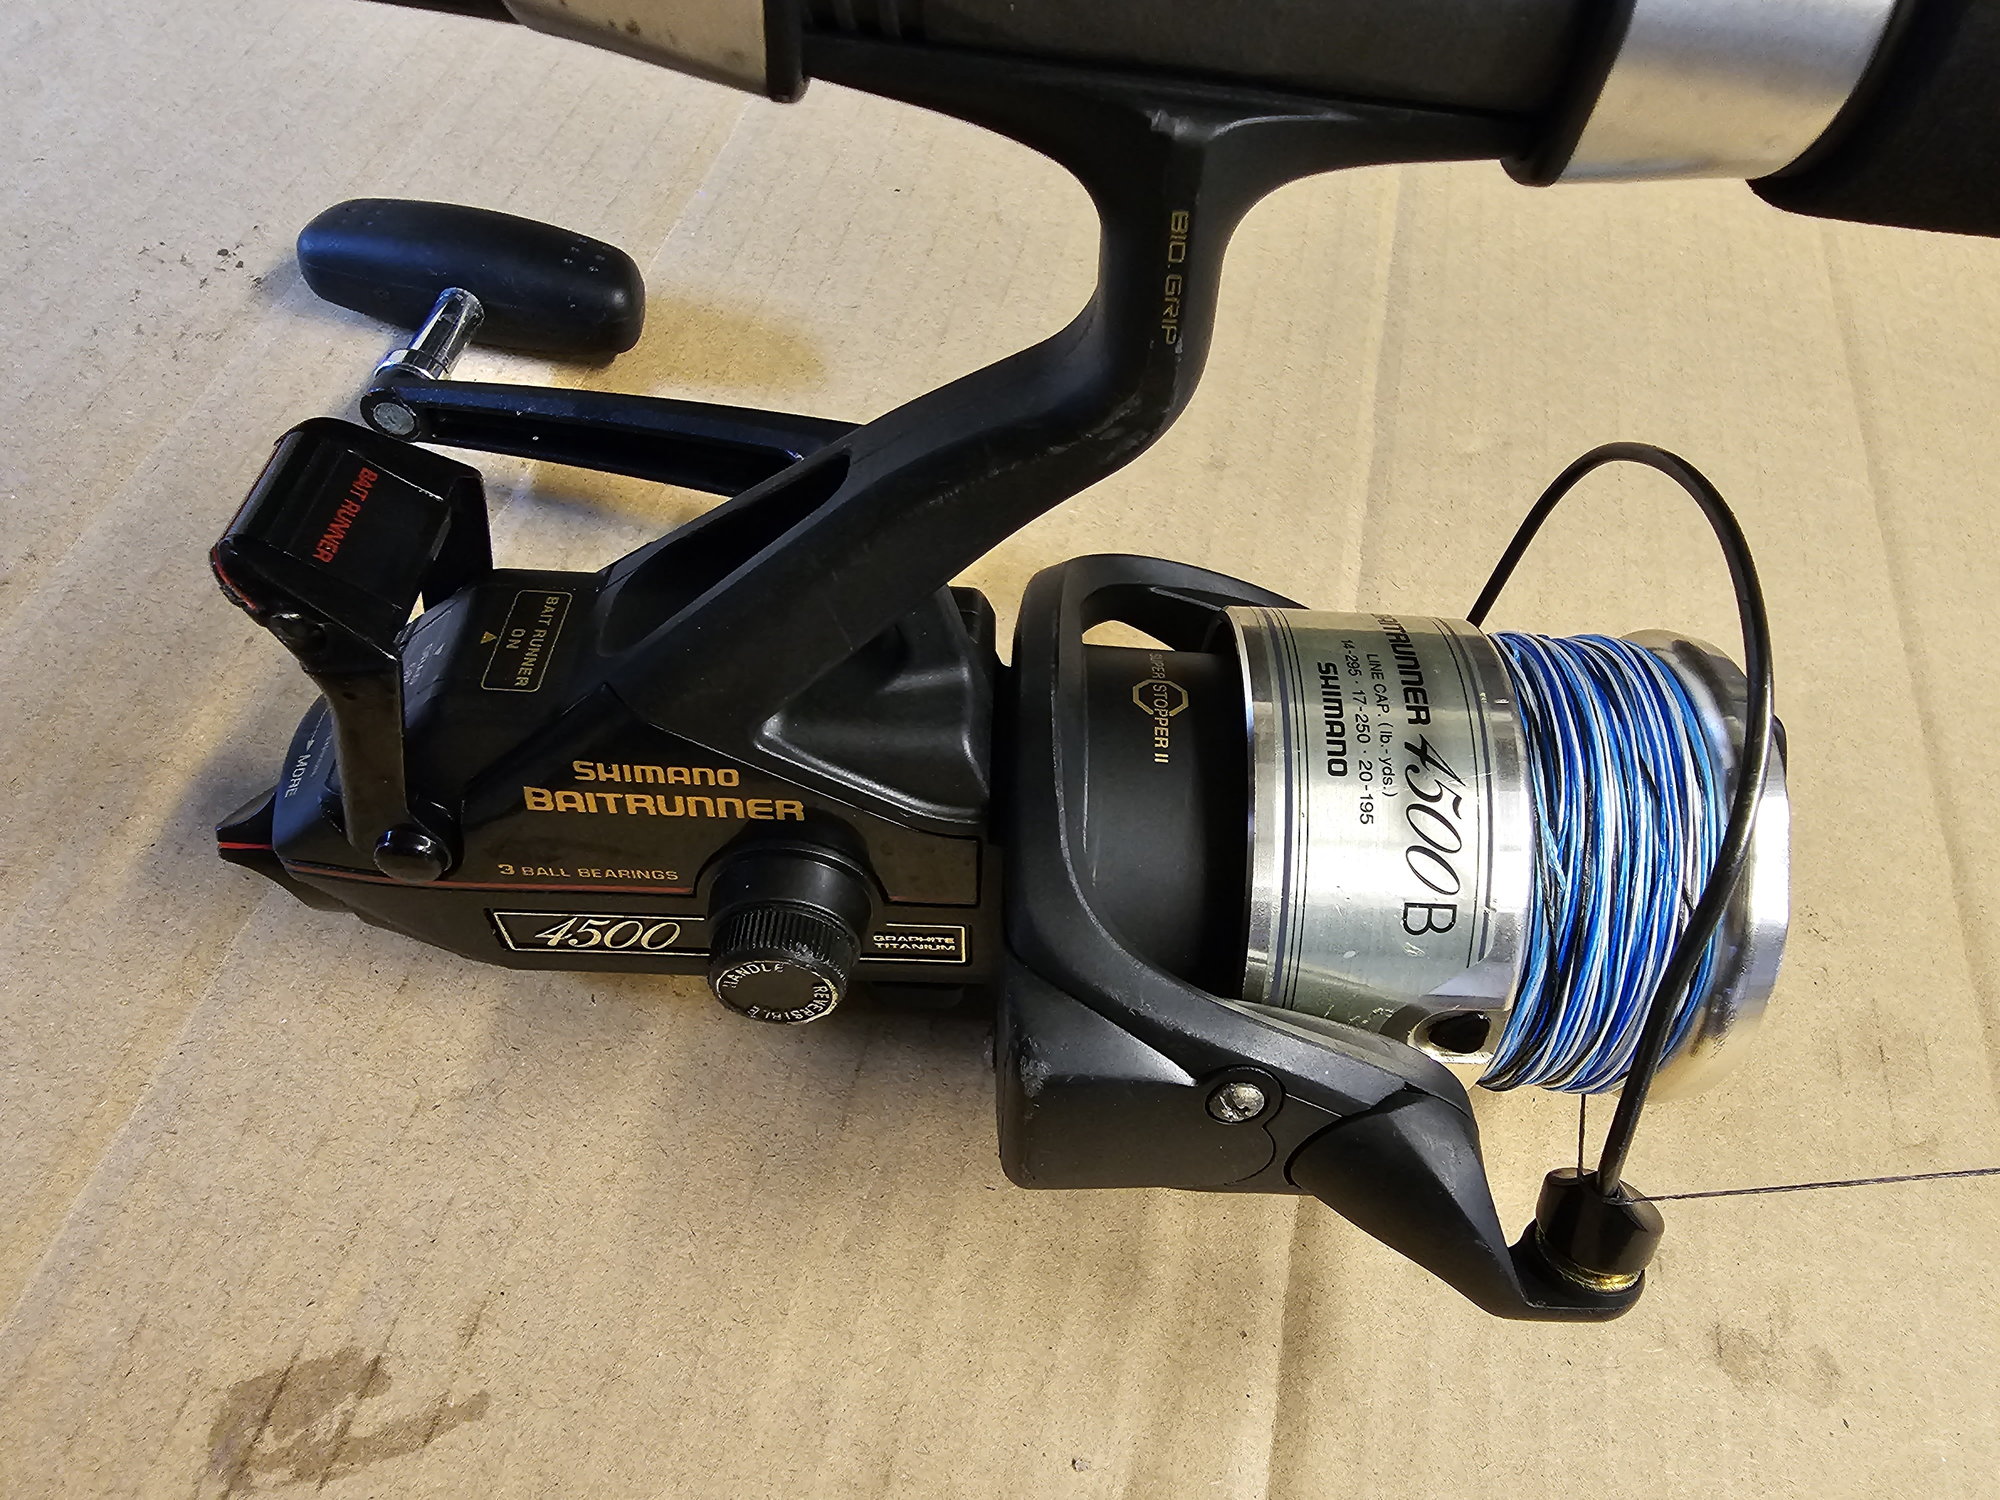 Shimano 3500 Baitrunner fishing reel how to take apart and service 